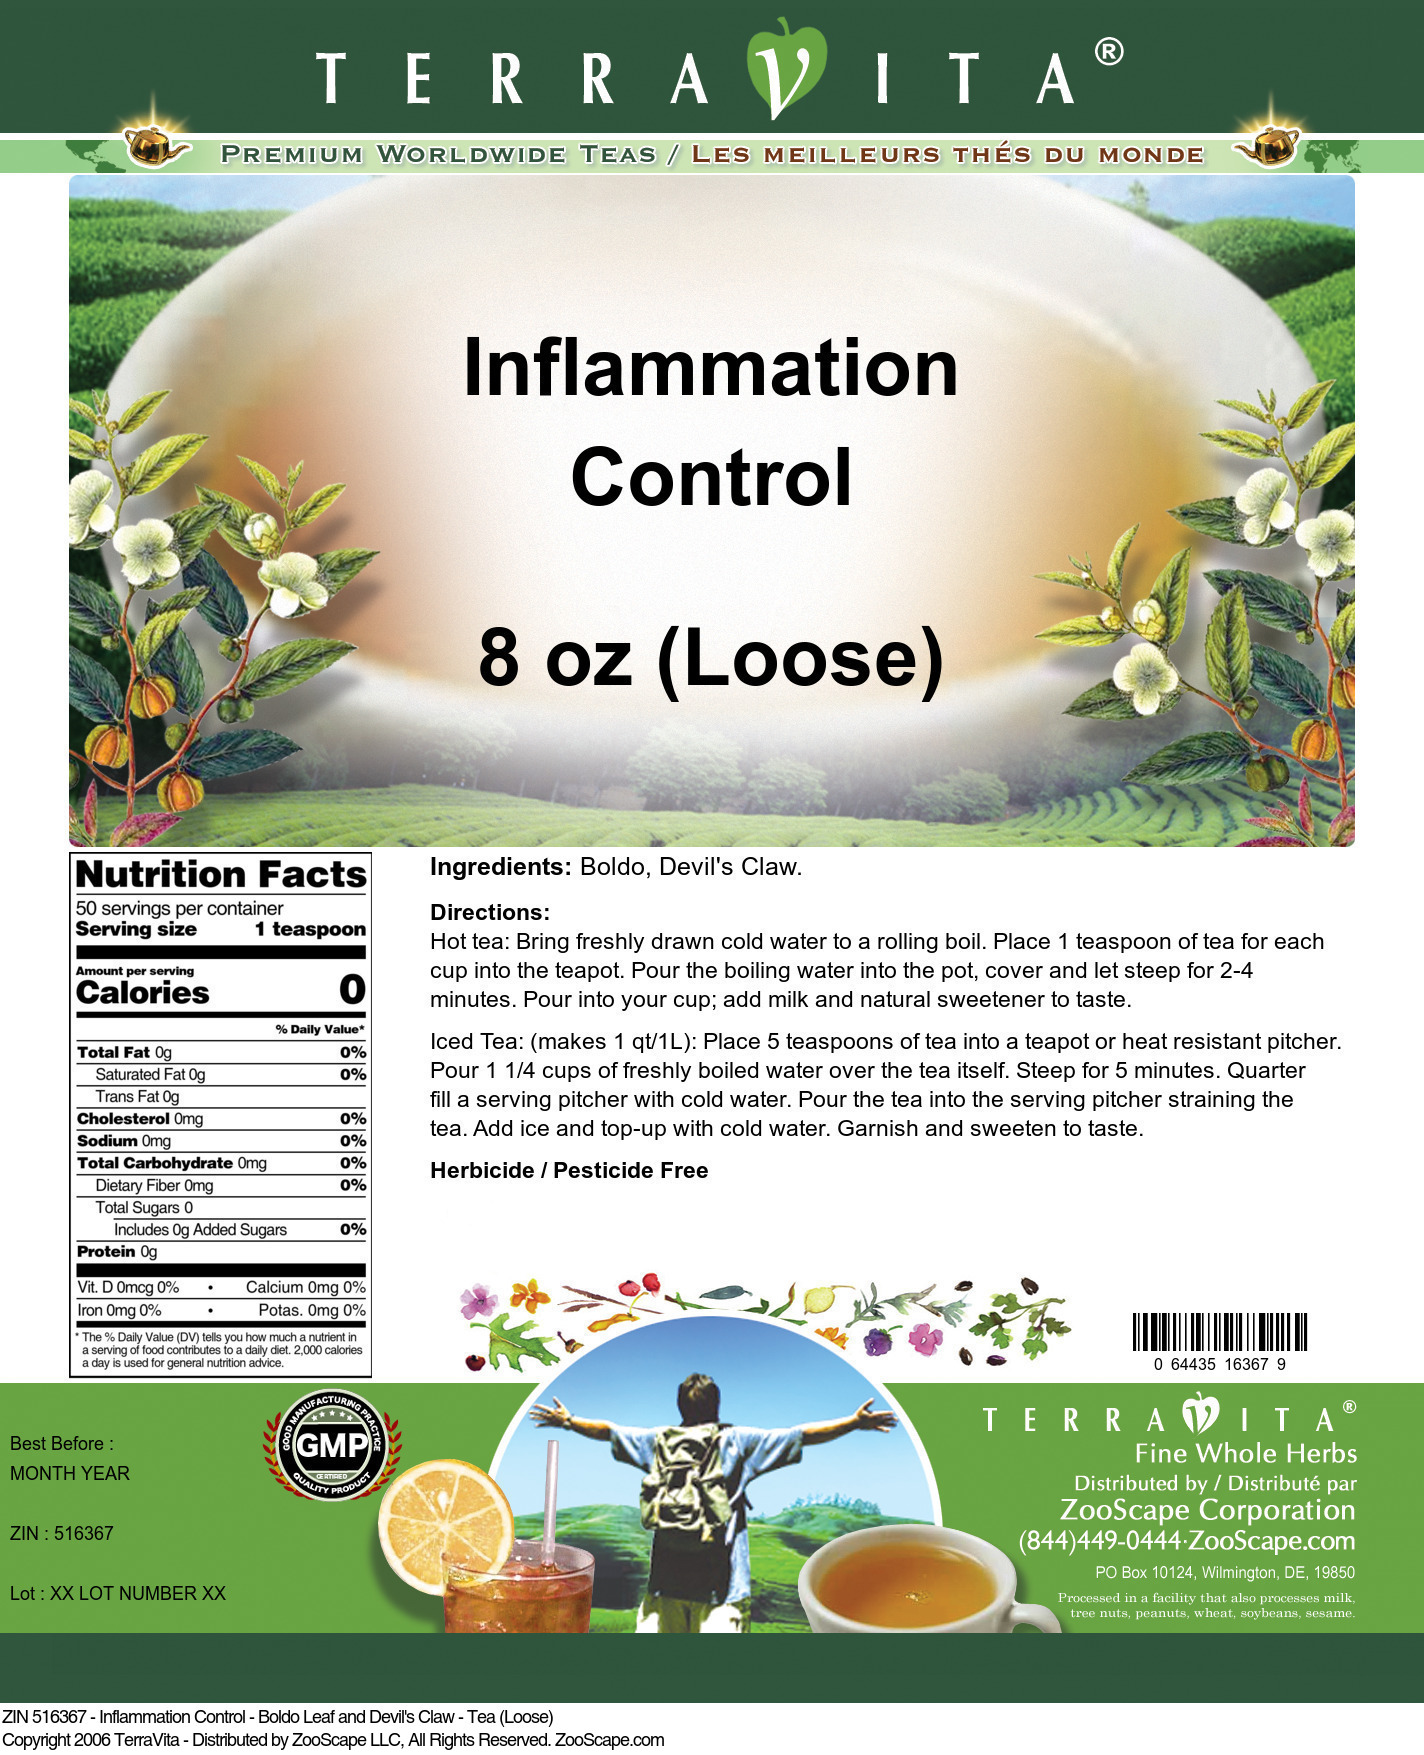 Inflammation Control - Boldo Leaf and Devil's Claw - Tea (Loose) - Label